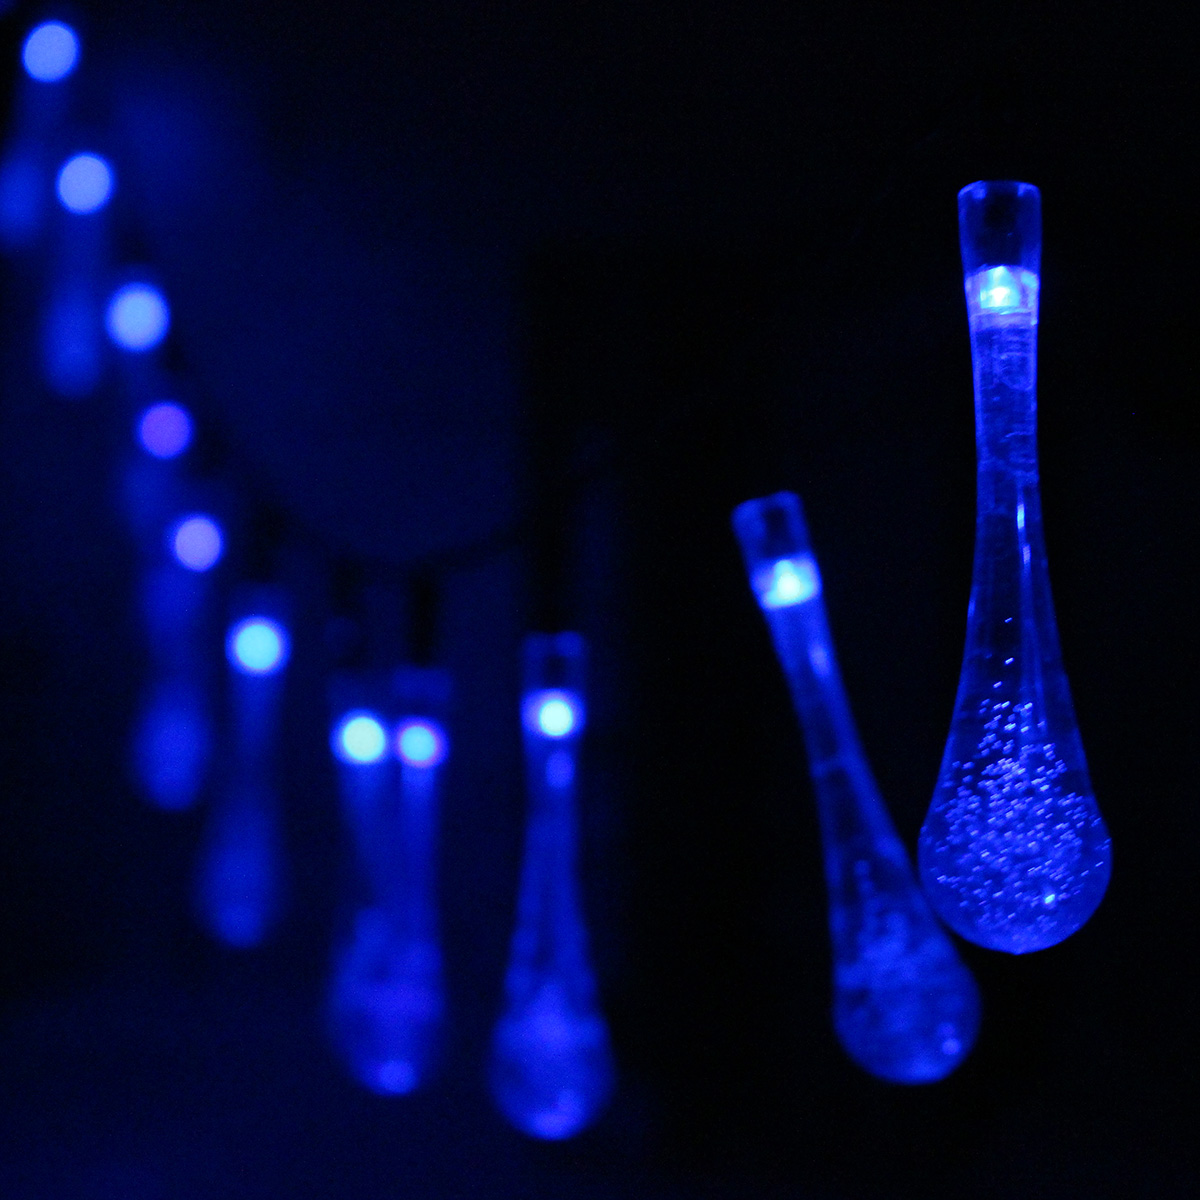 Solar-Powered-Outdoor-50-LED-Droplet-Fairy-String-Light-Wedding-Christmas-Party-Home-Decor-Lamp-DC3V-1162583-8